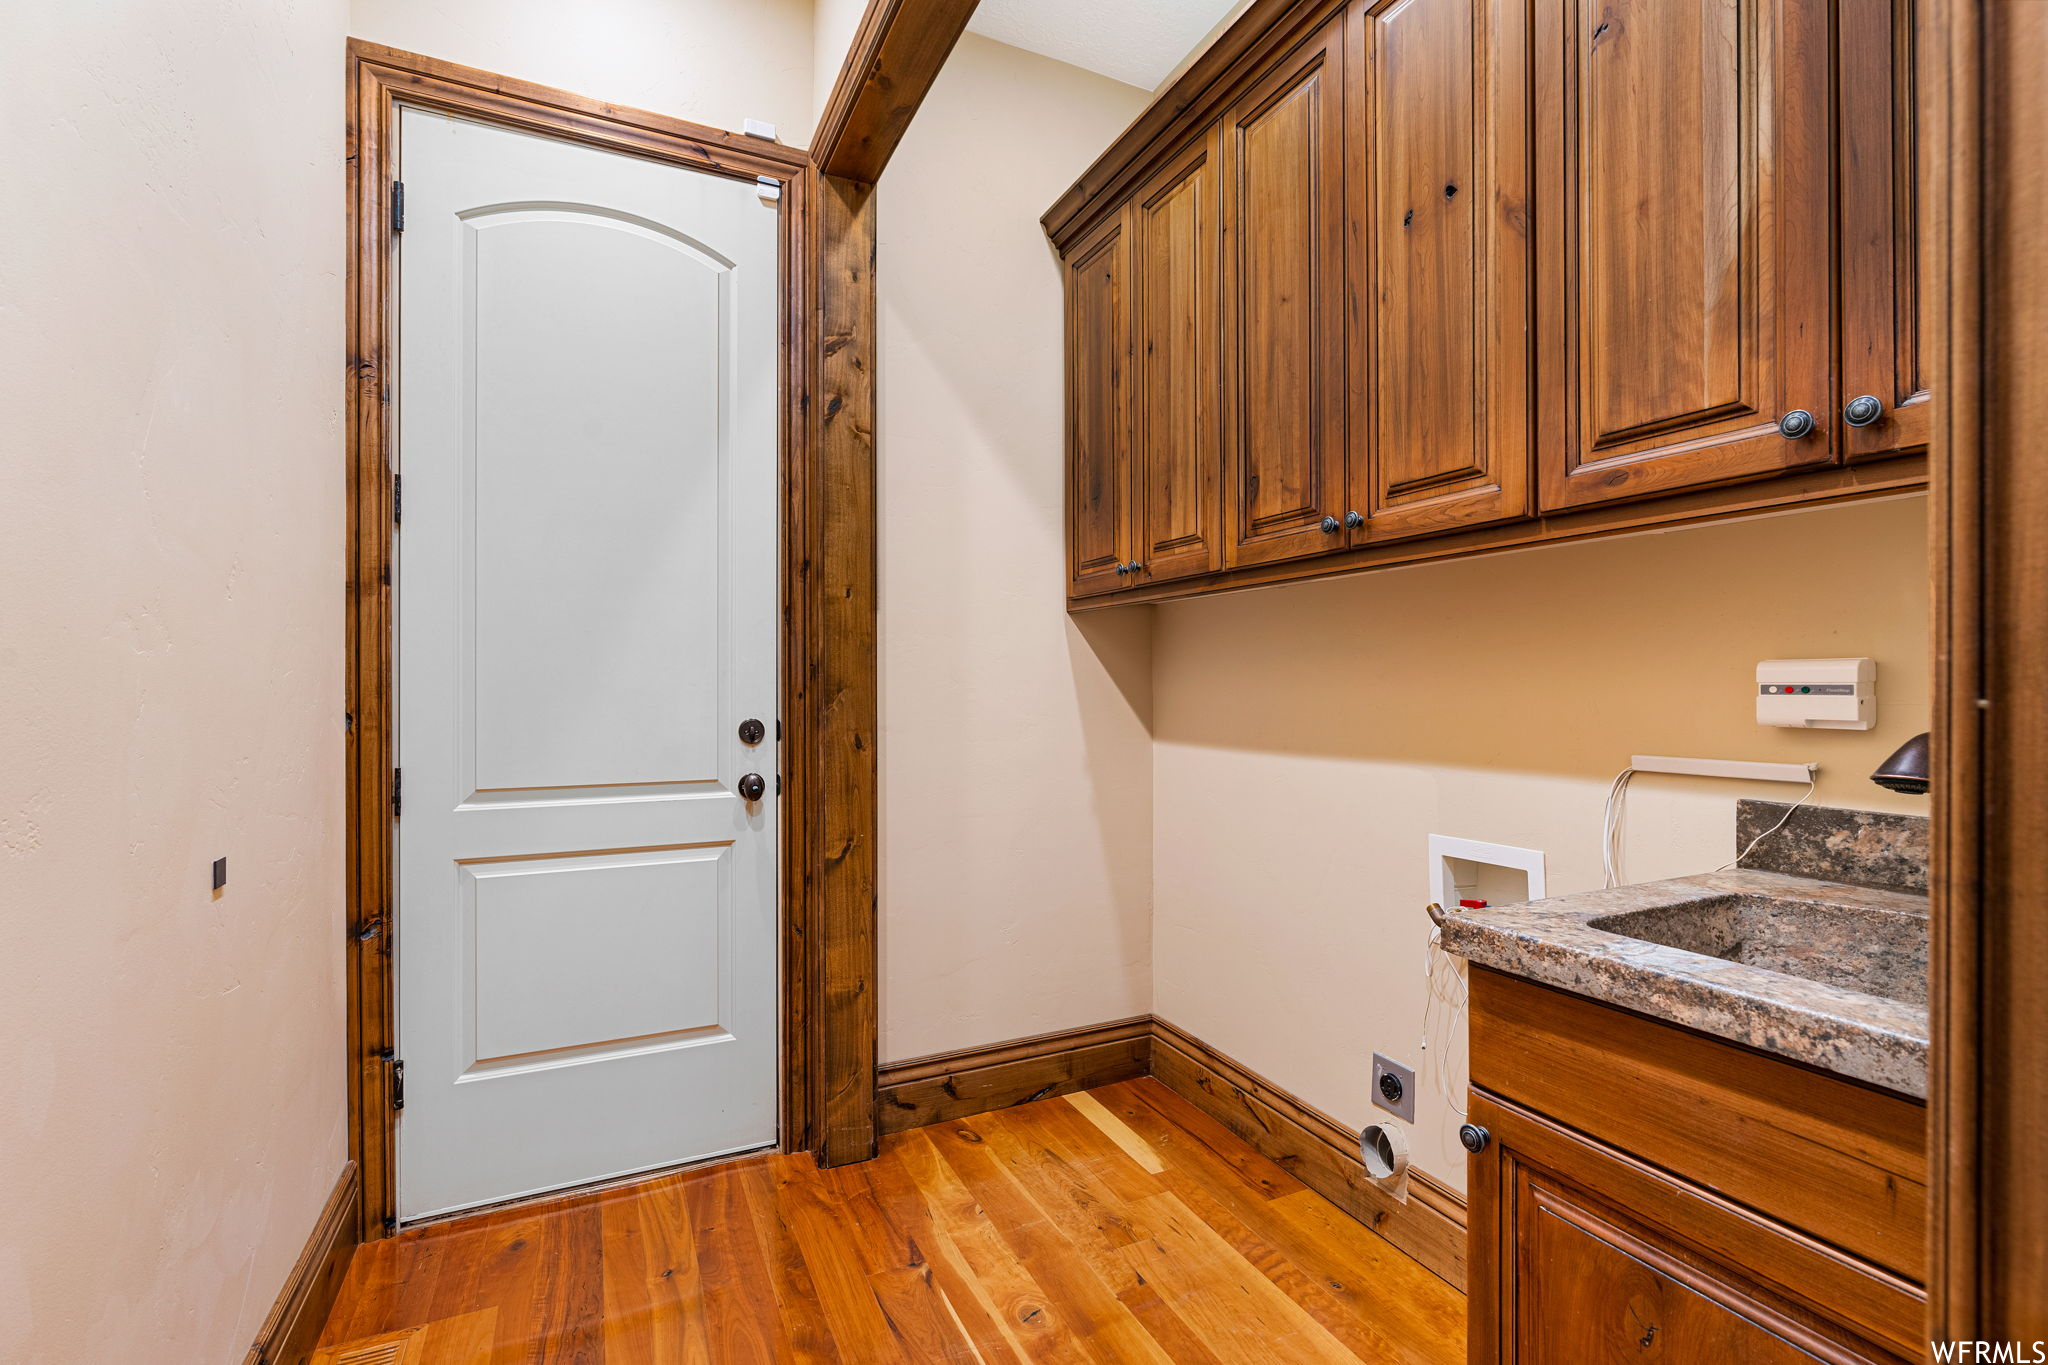 Laundry area with cabinets, hookup for an electric dryer, light hardwood floors, and hookup for a washing machine